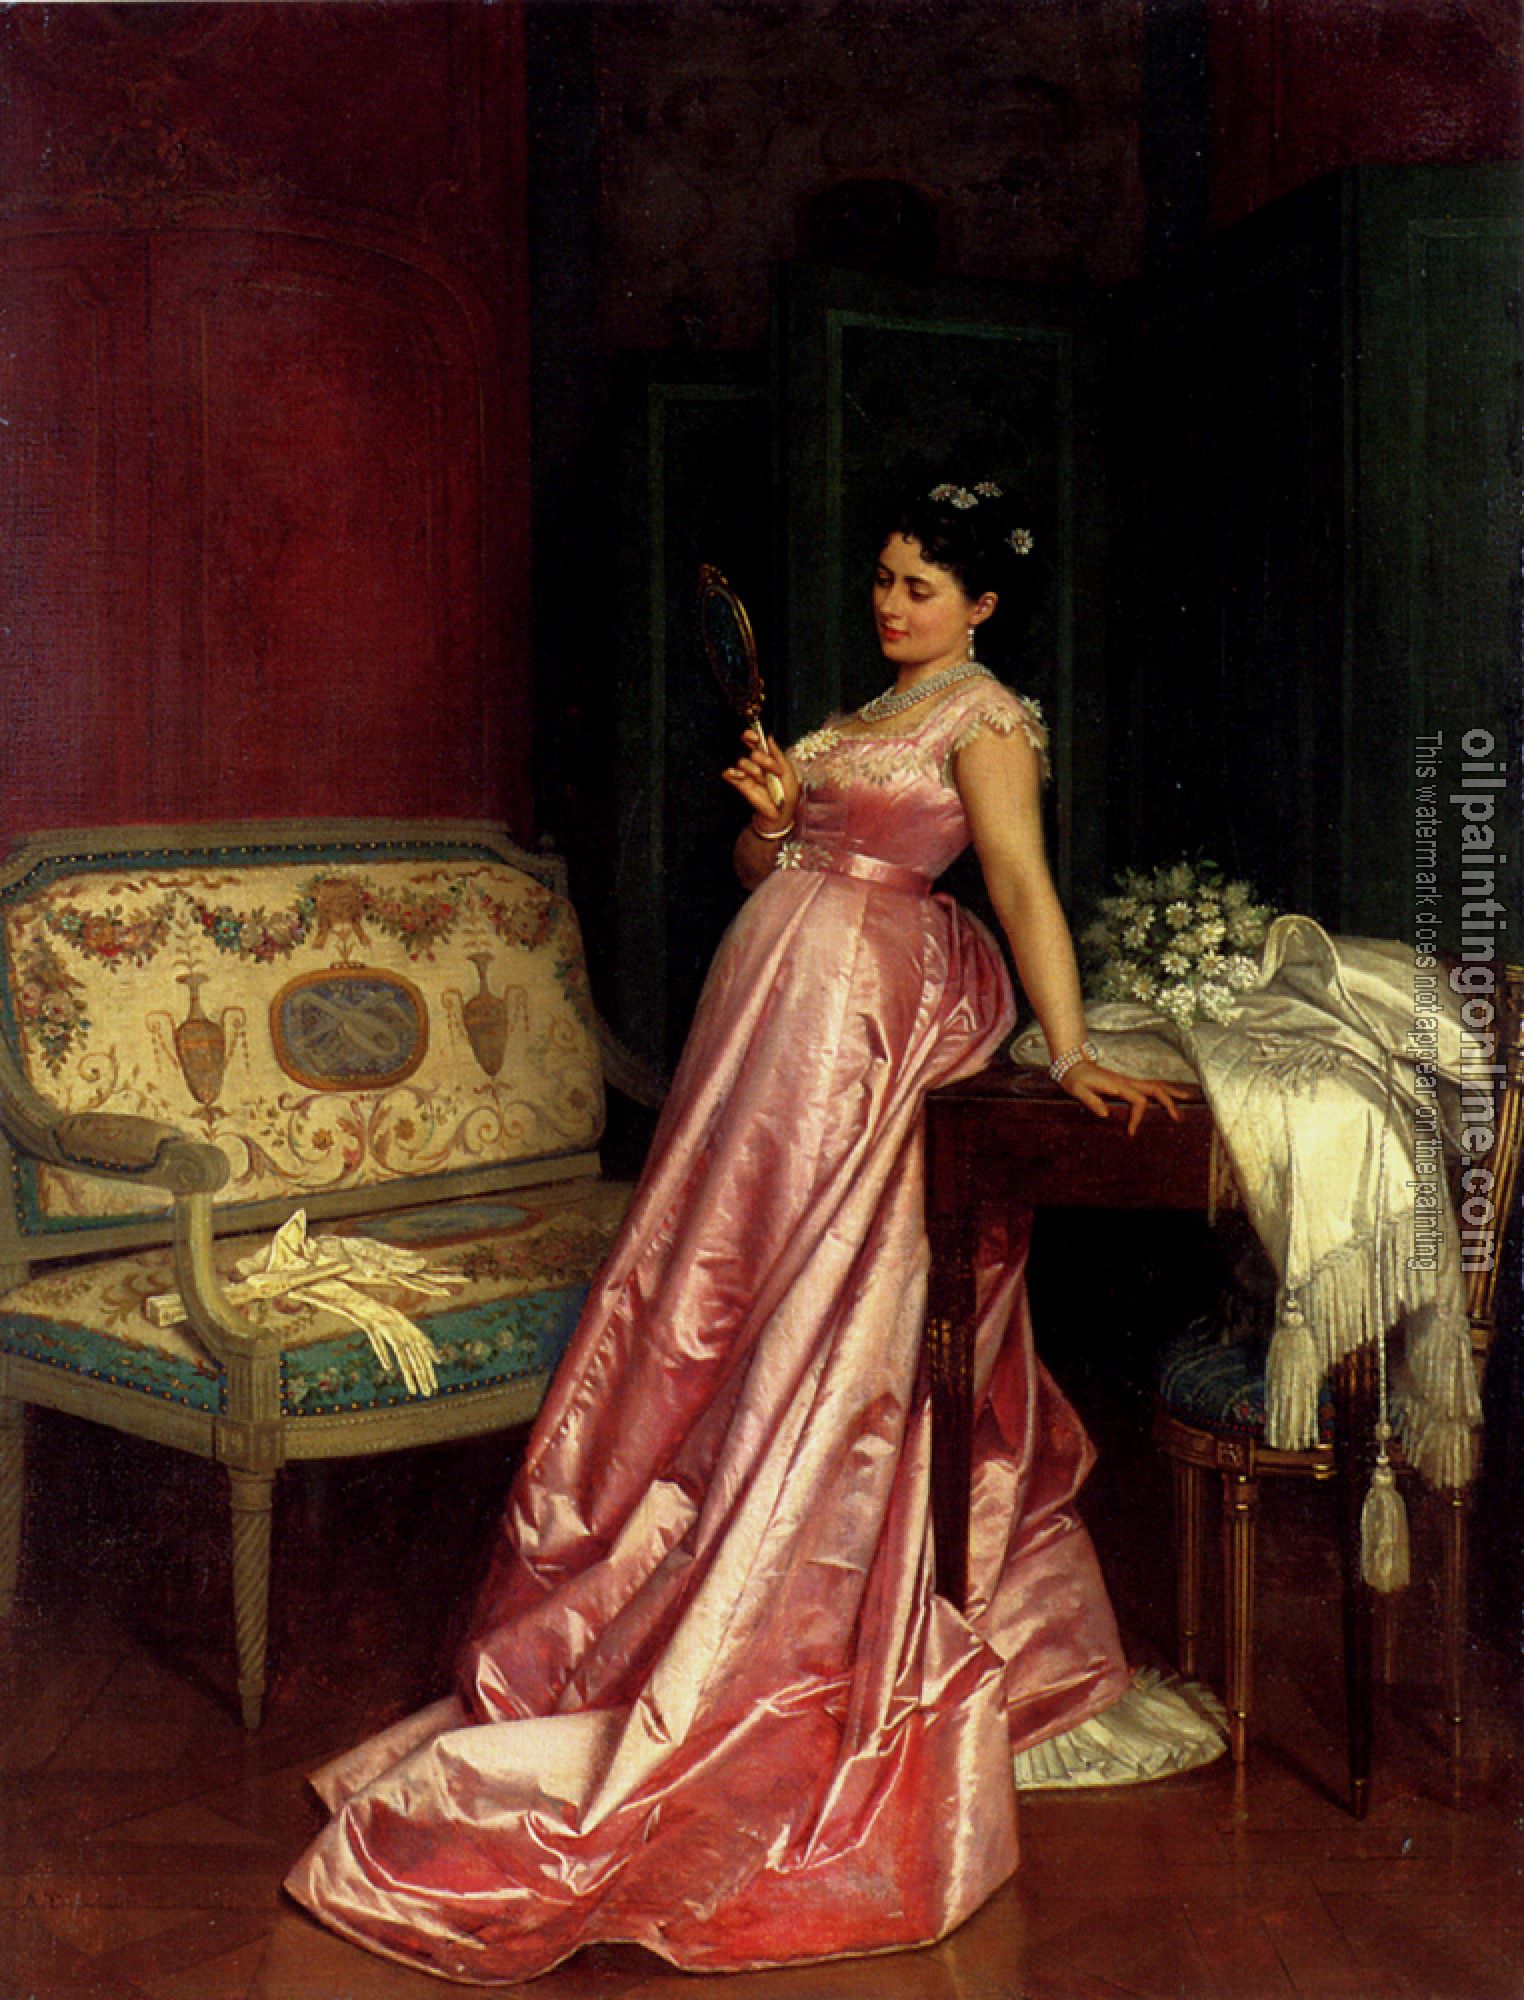 Toulmouche, Auguste - The Admiring Glance